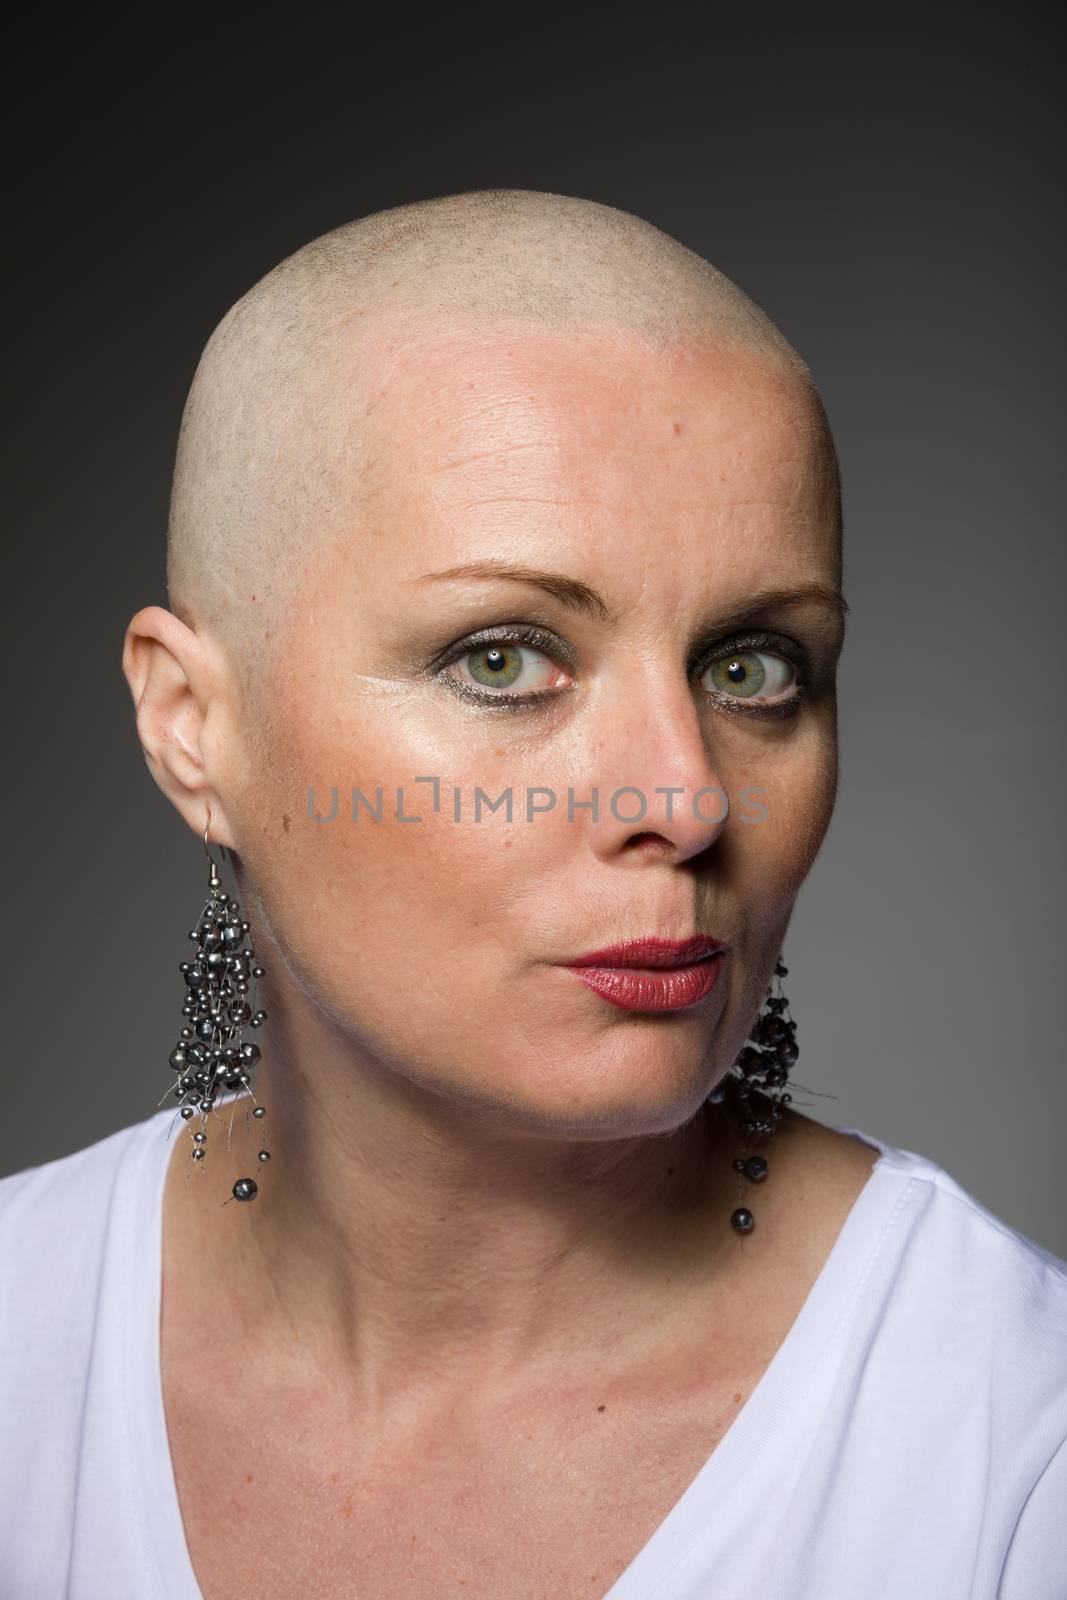 Portrait of beautiful middle age woman sad patient with cancer with shaved head without hair, hope in healing.